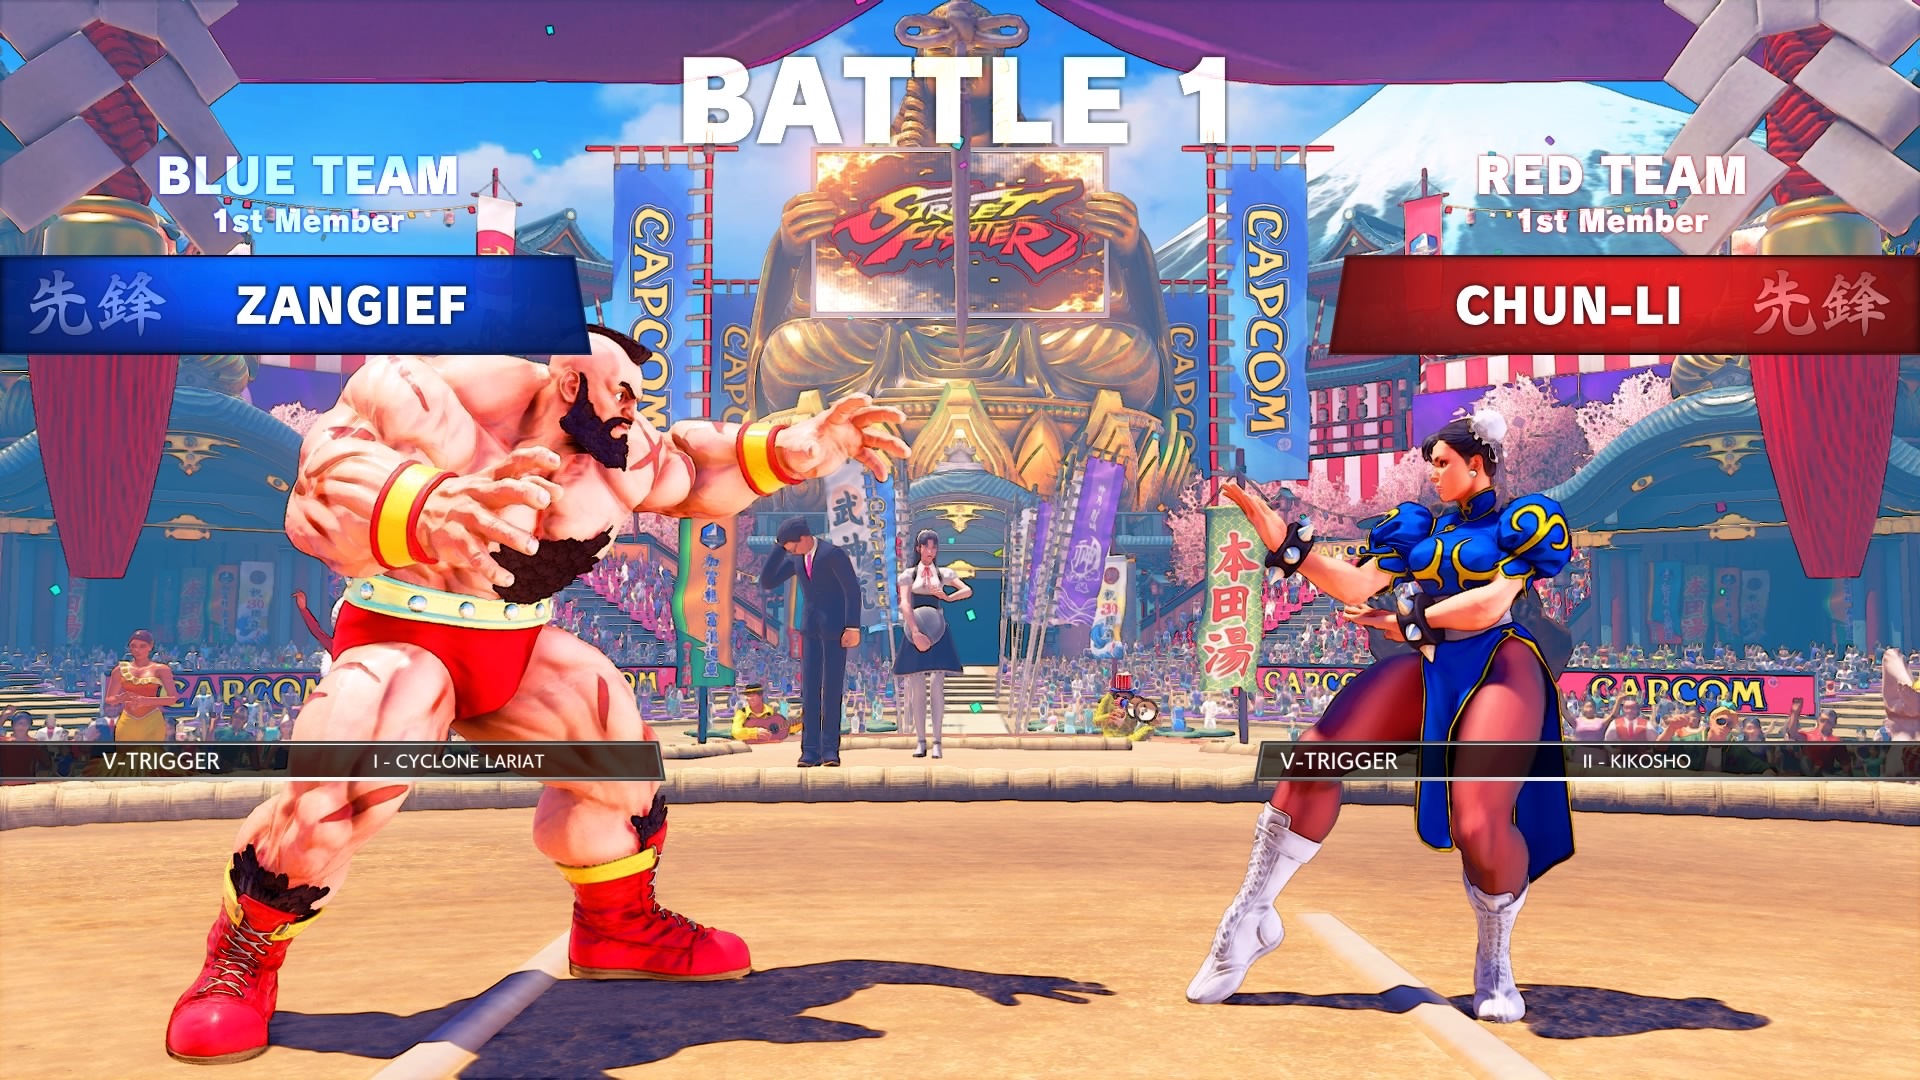 Zangief has EX Double Lariat and anti-air Super Art revealed in